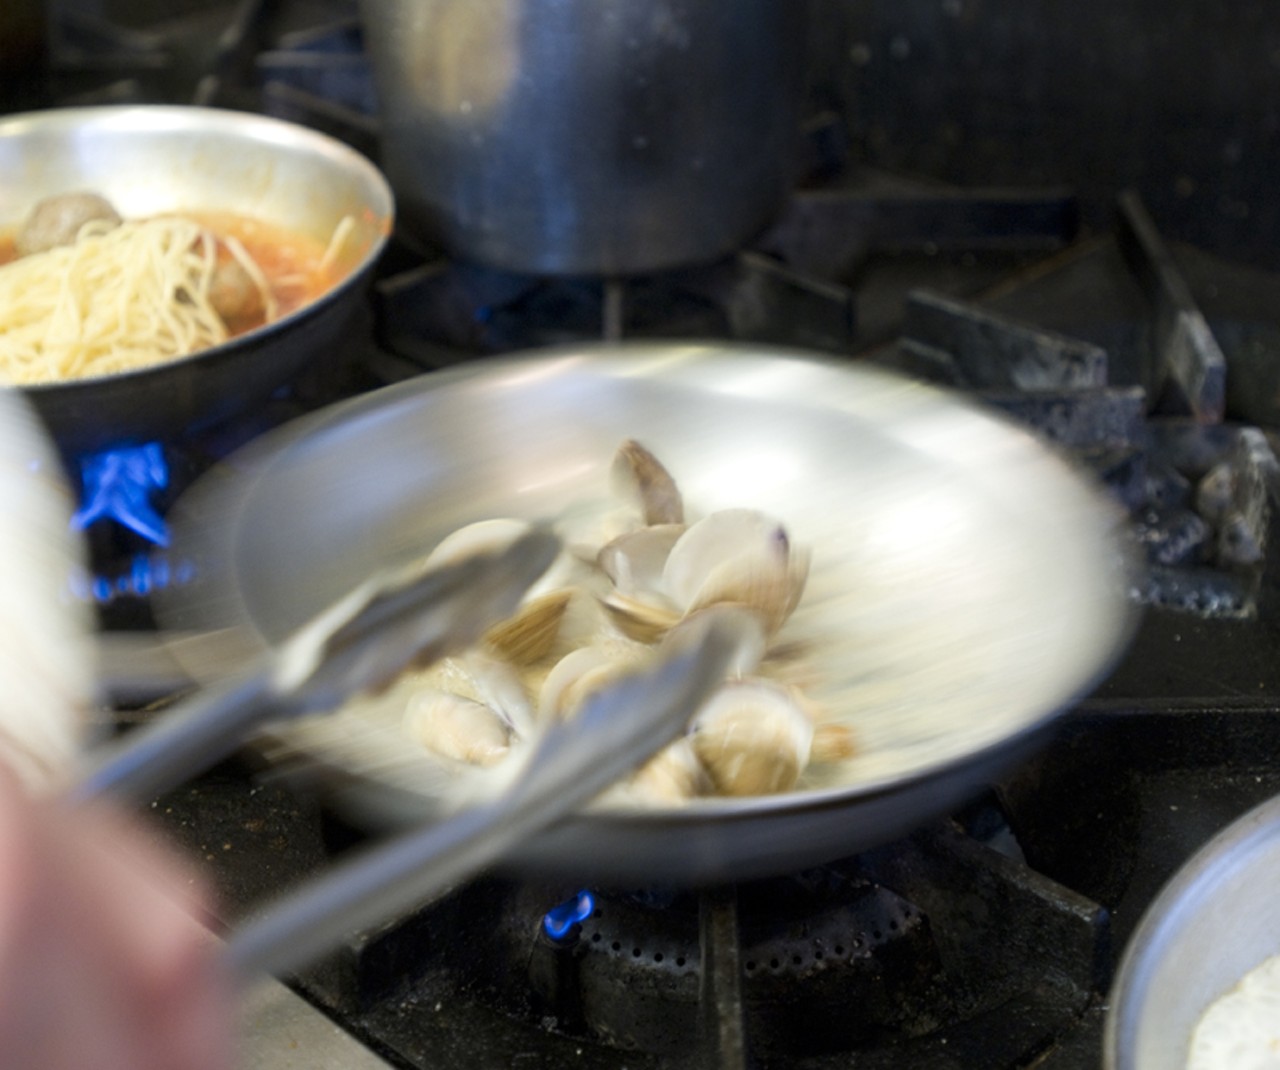 Again, Eric Below is saut&eacute;ing the clams. Next comes the linguini, cooked al dent&eacute;.